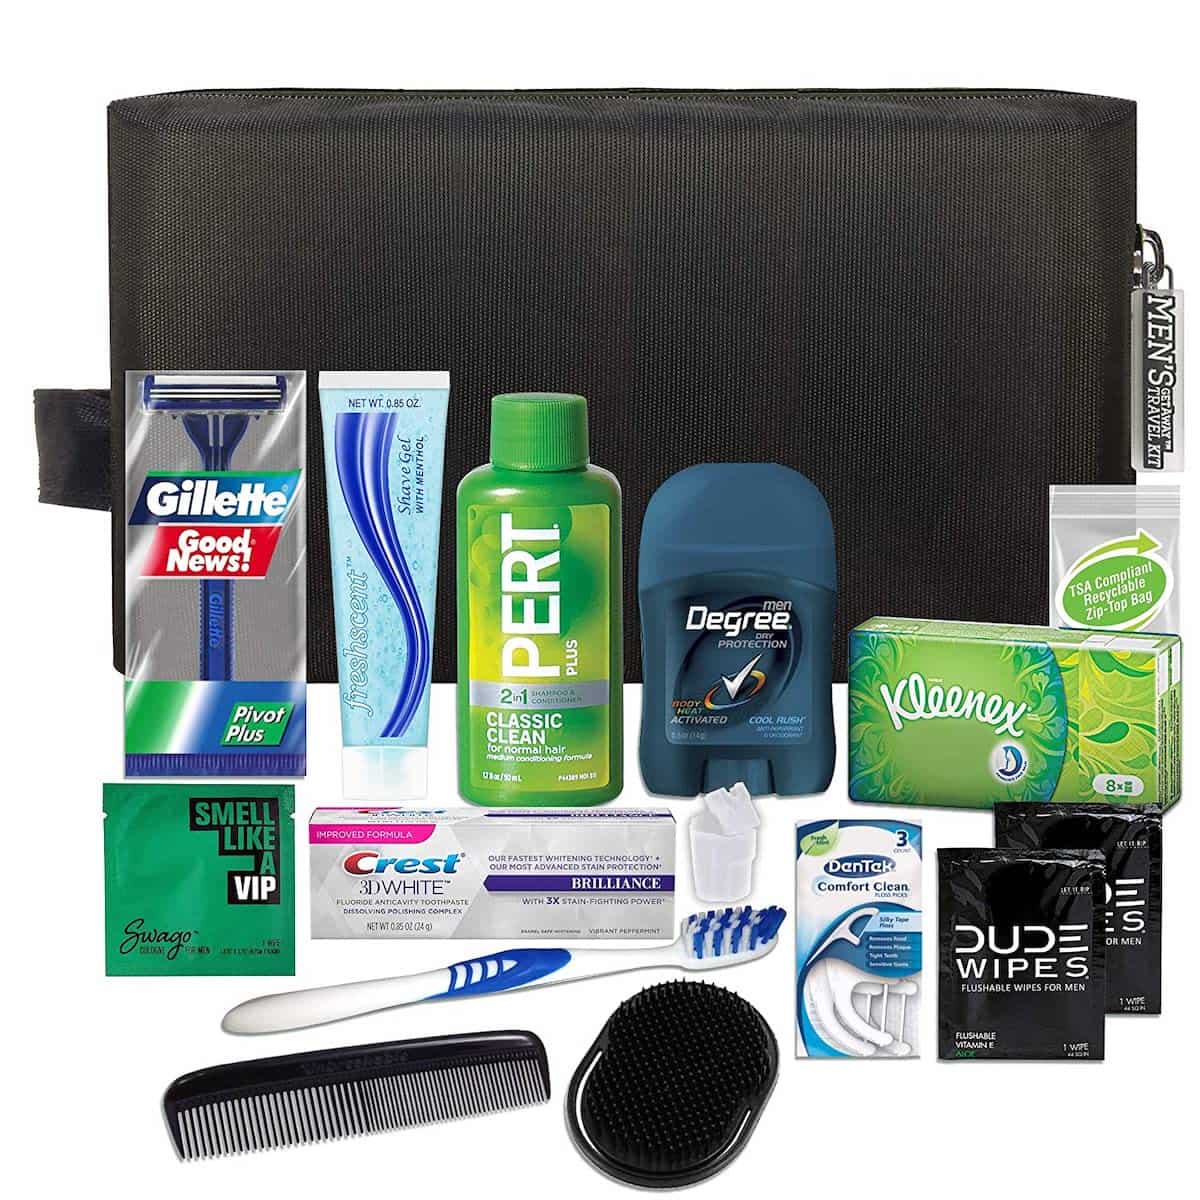 Best Accessories for Men who travel: A convenience kit